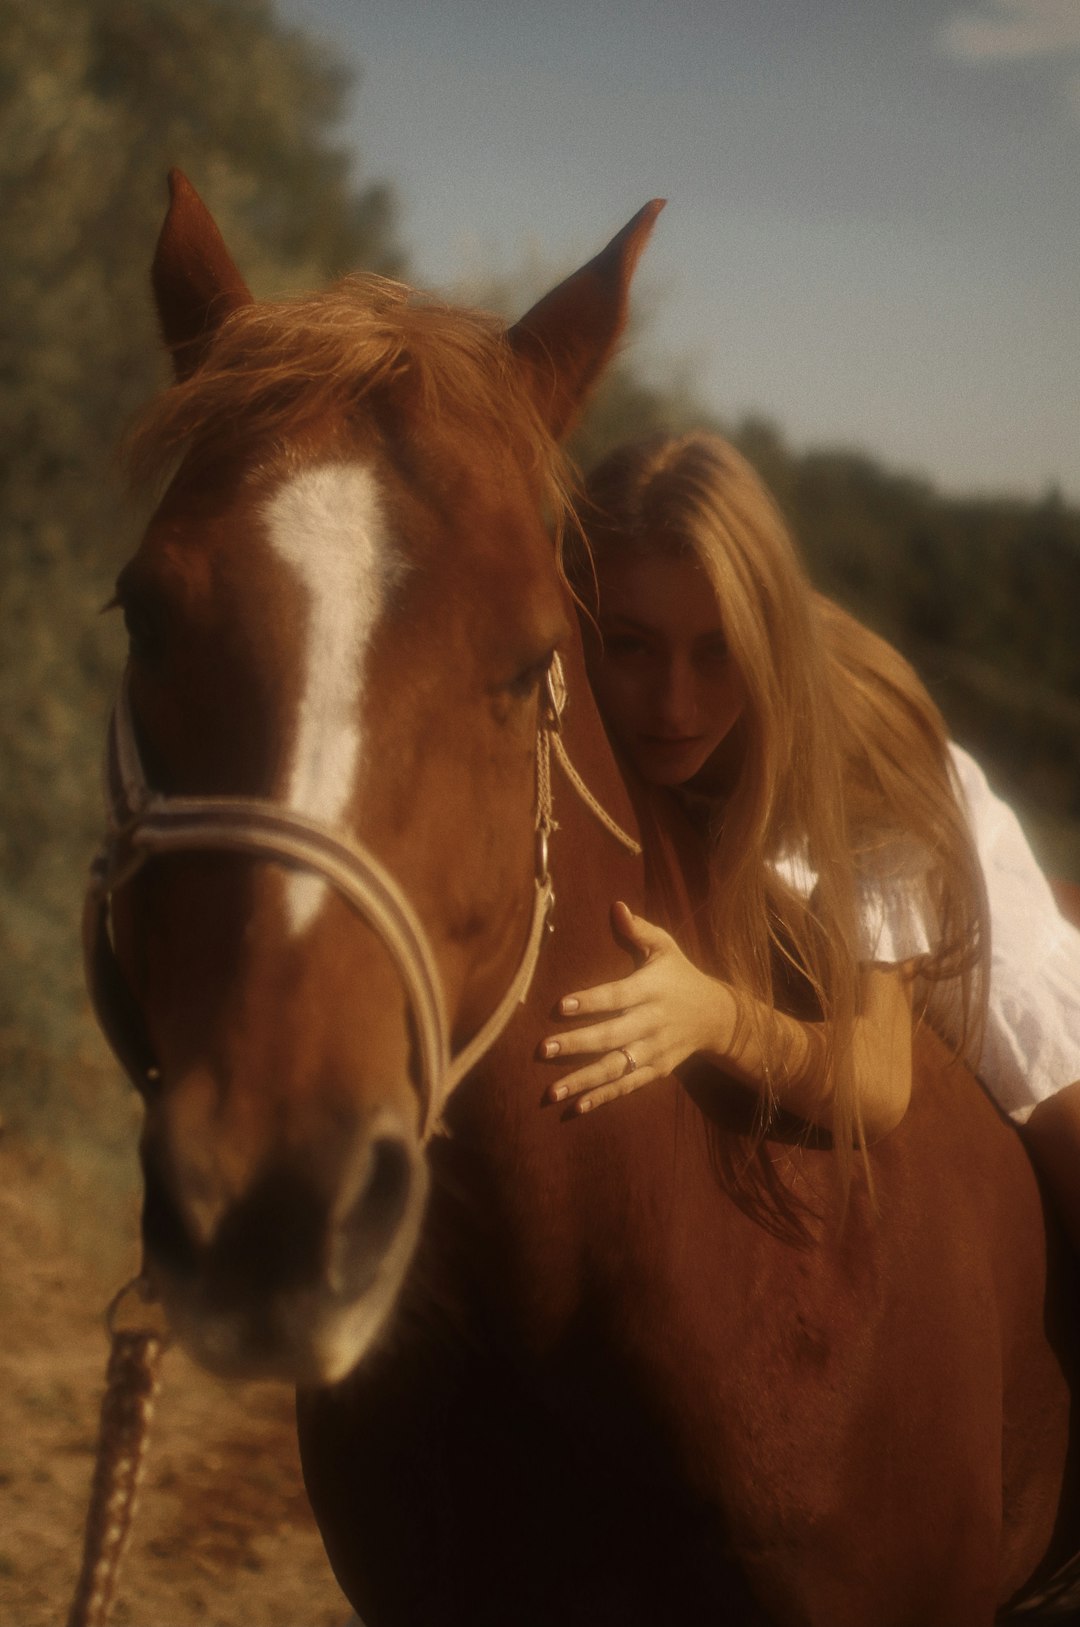 woman in white shirt holding brown horse